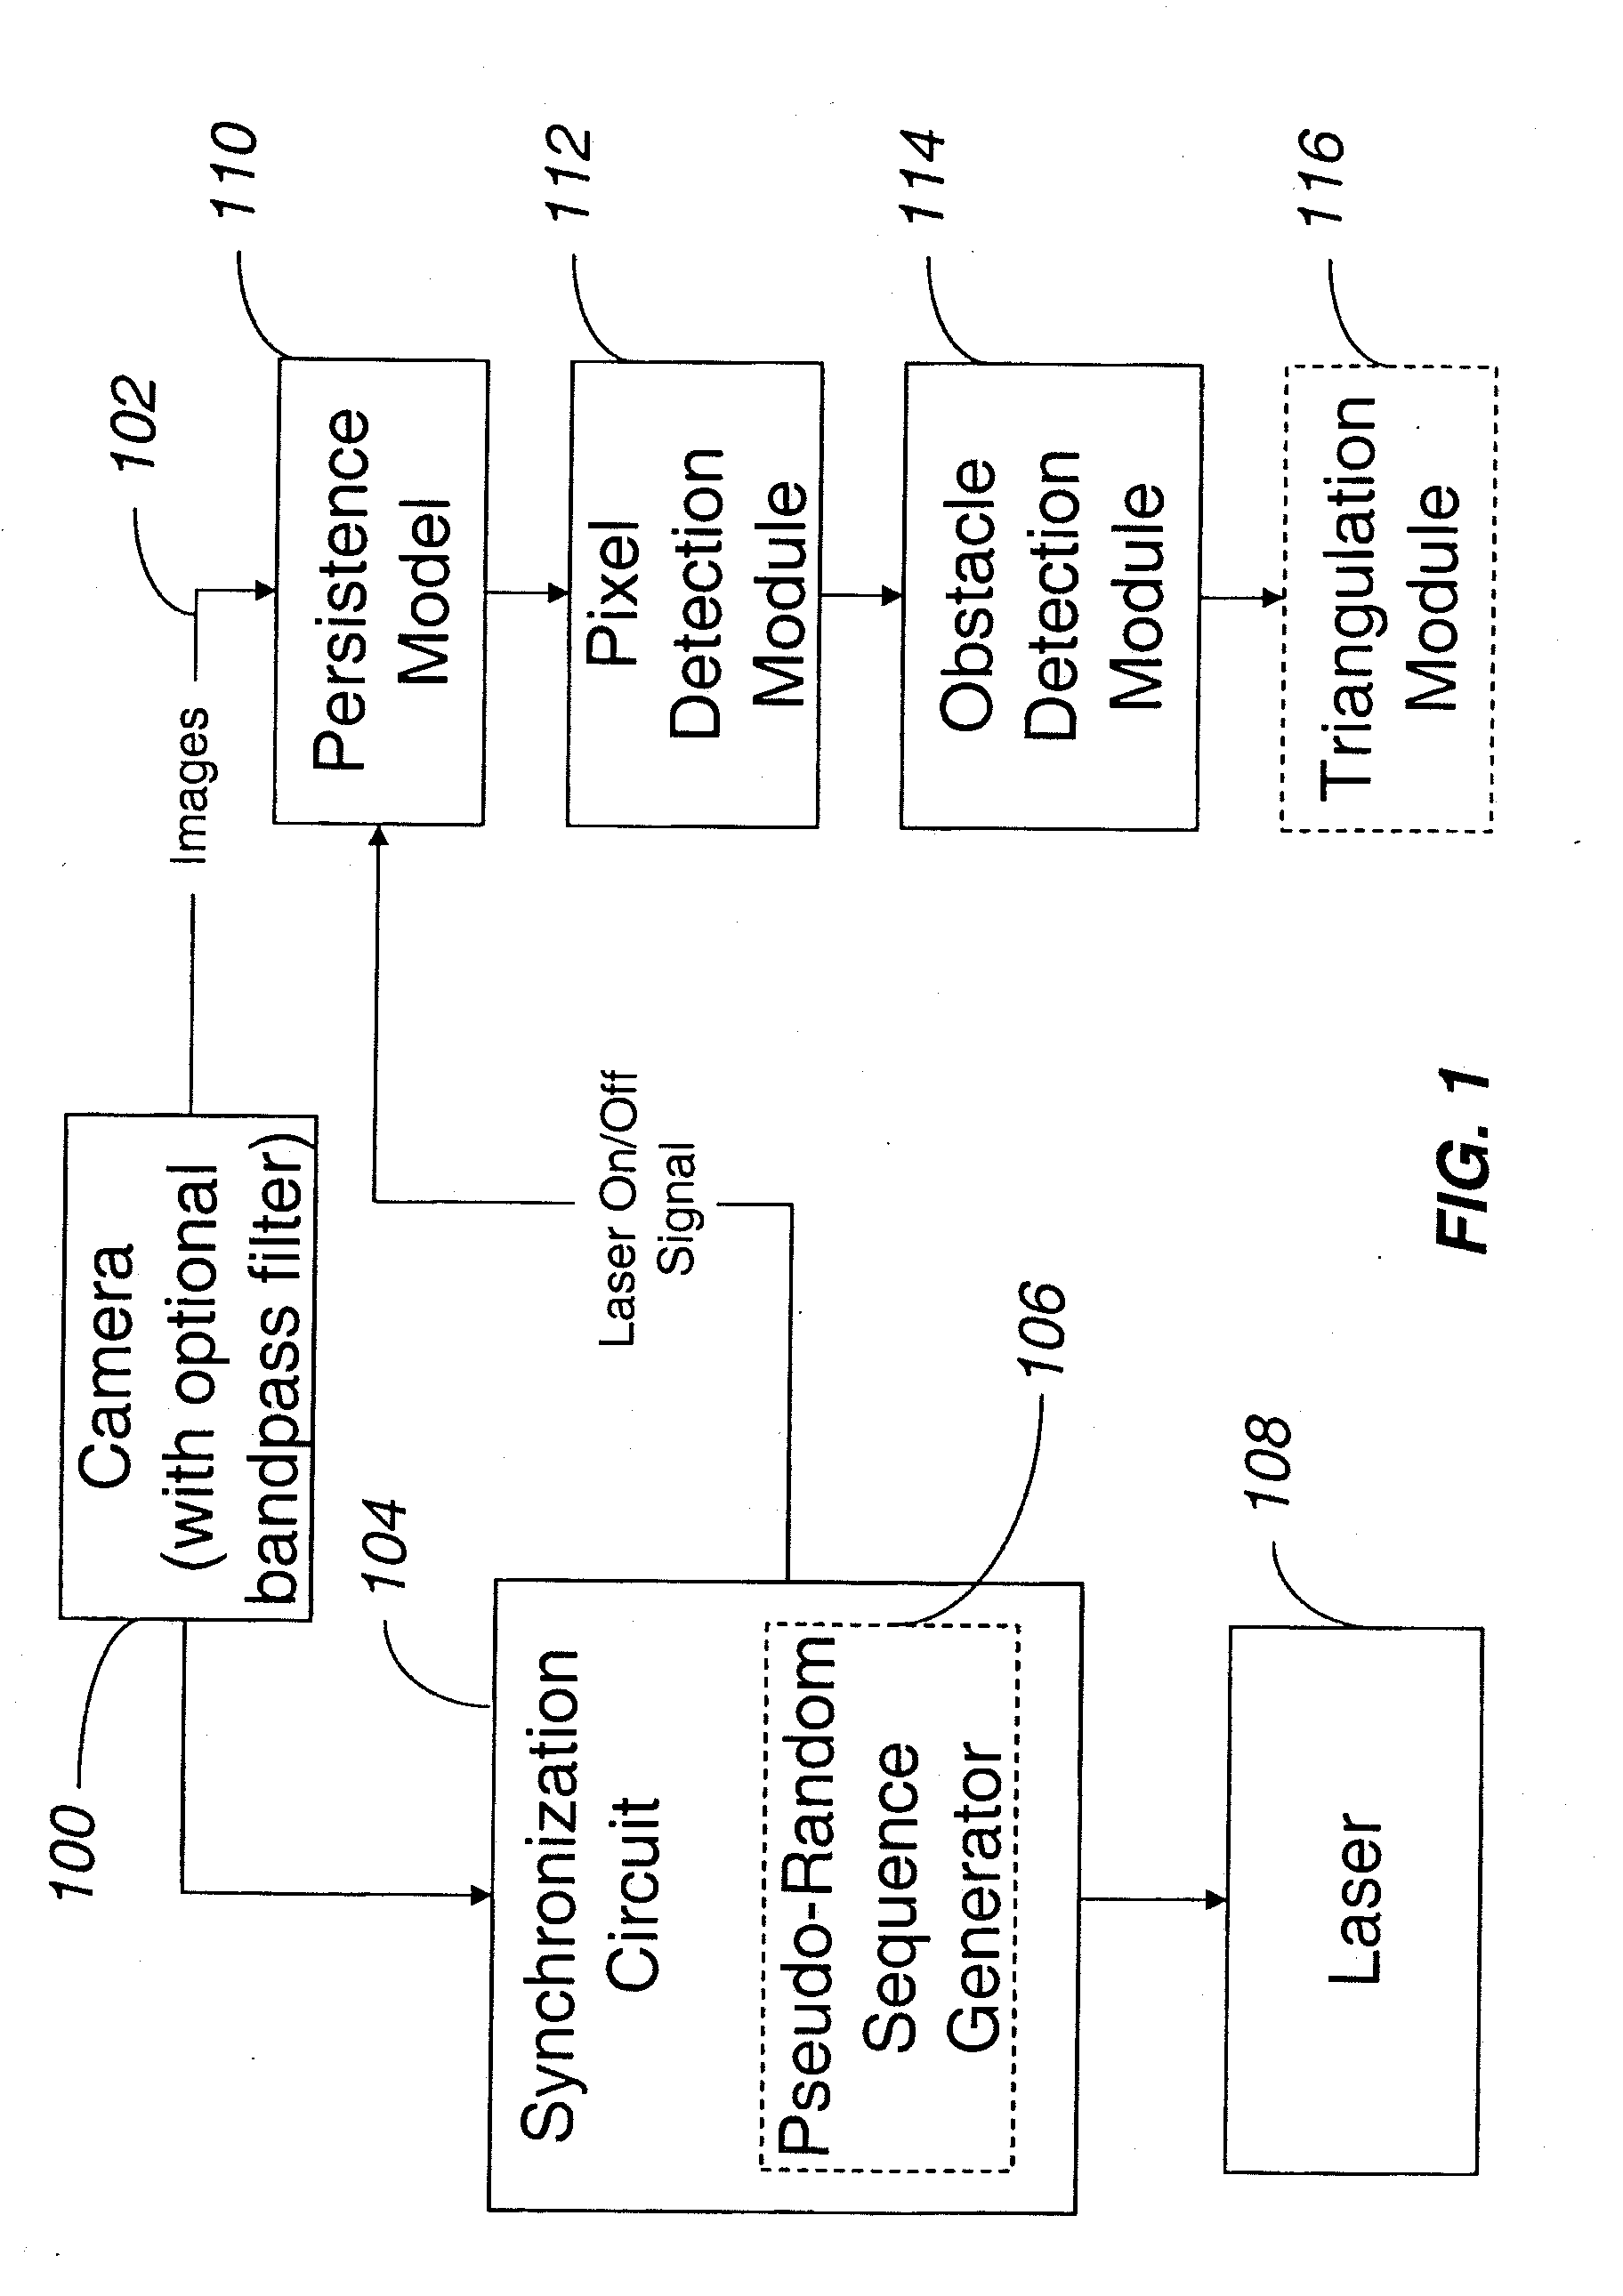 Methods and systems for obstacle detection using structured light